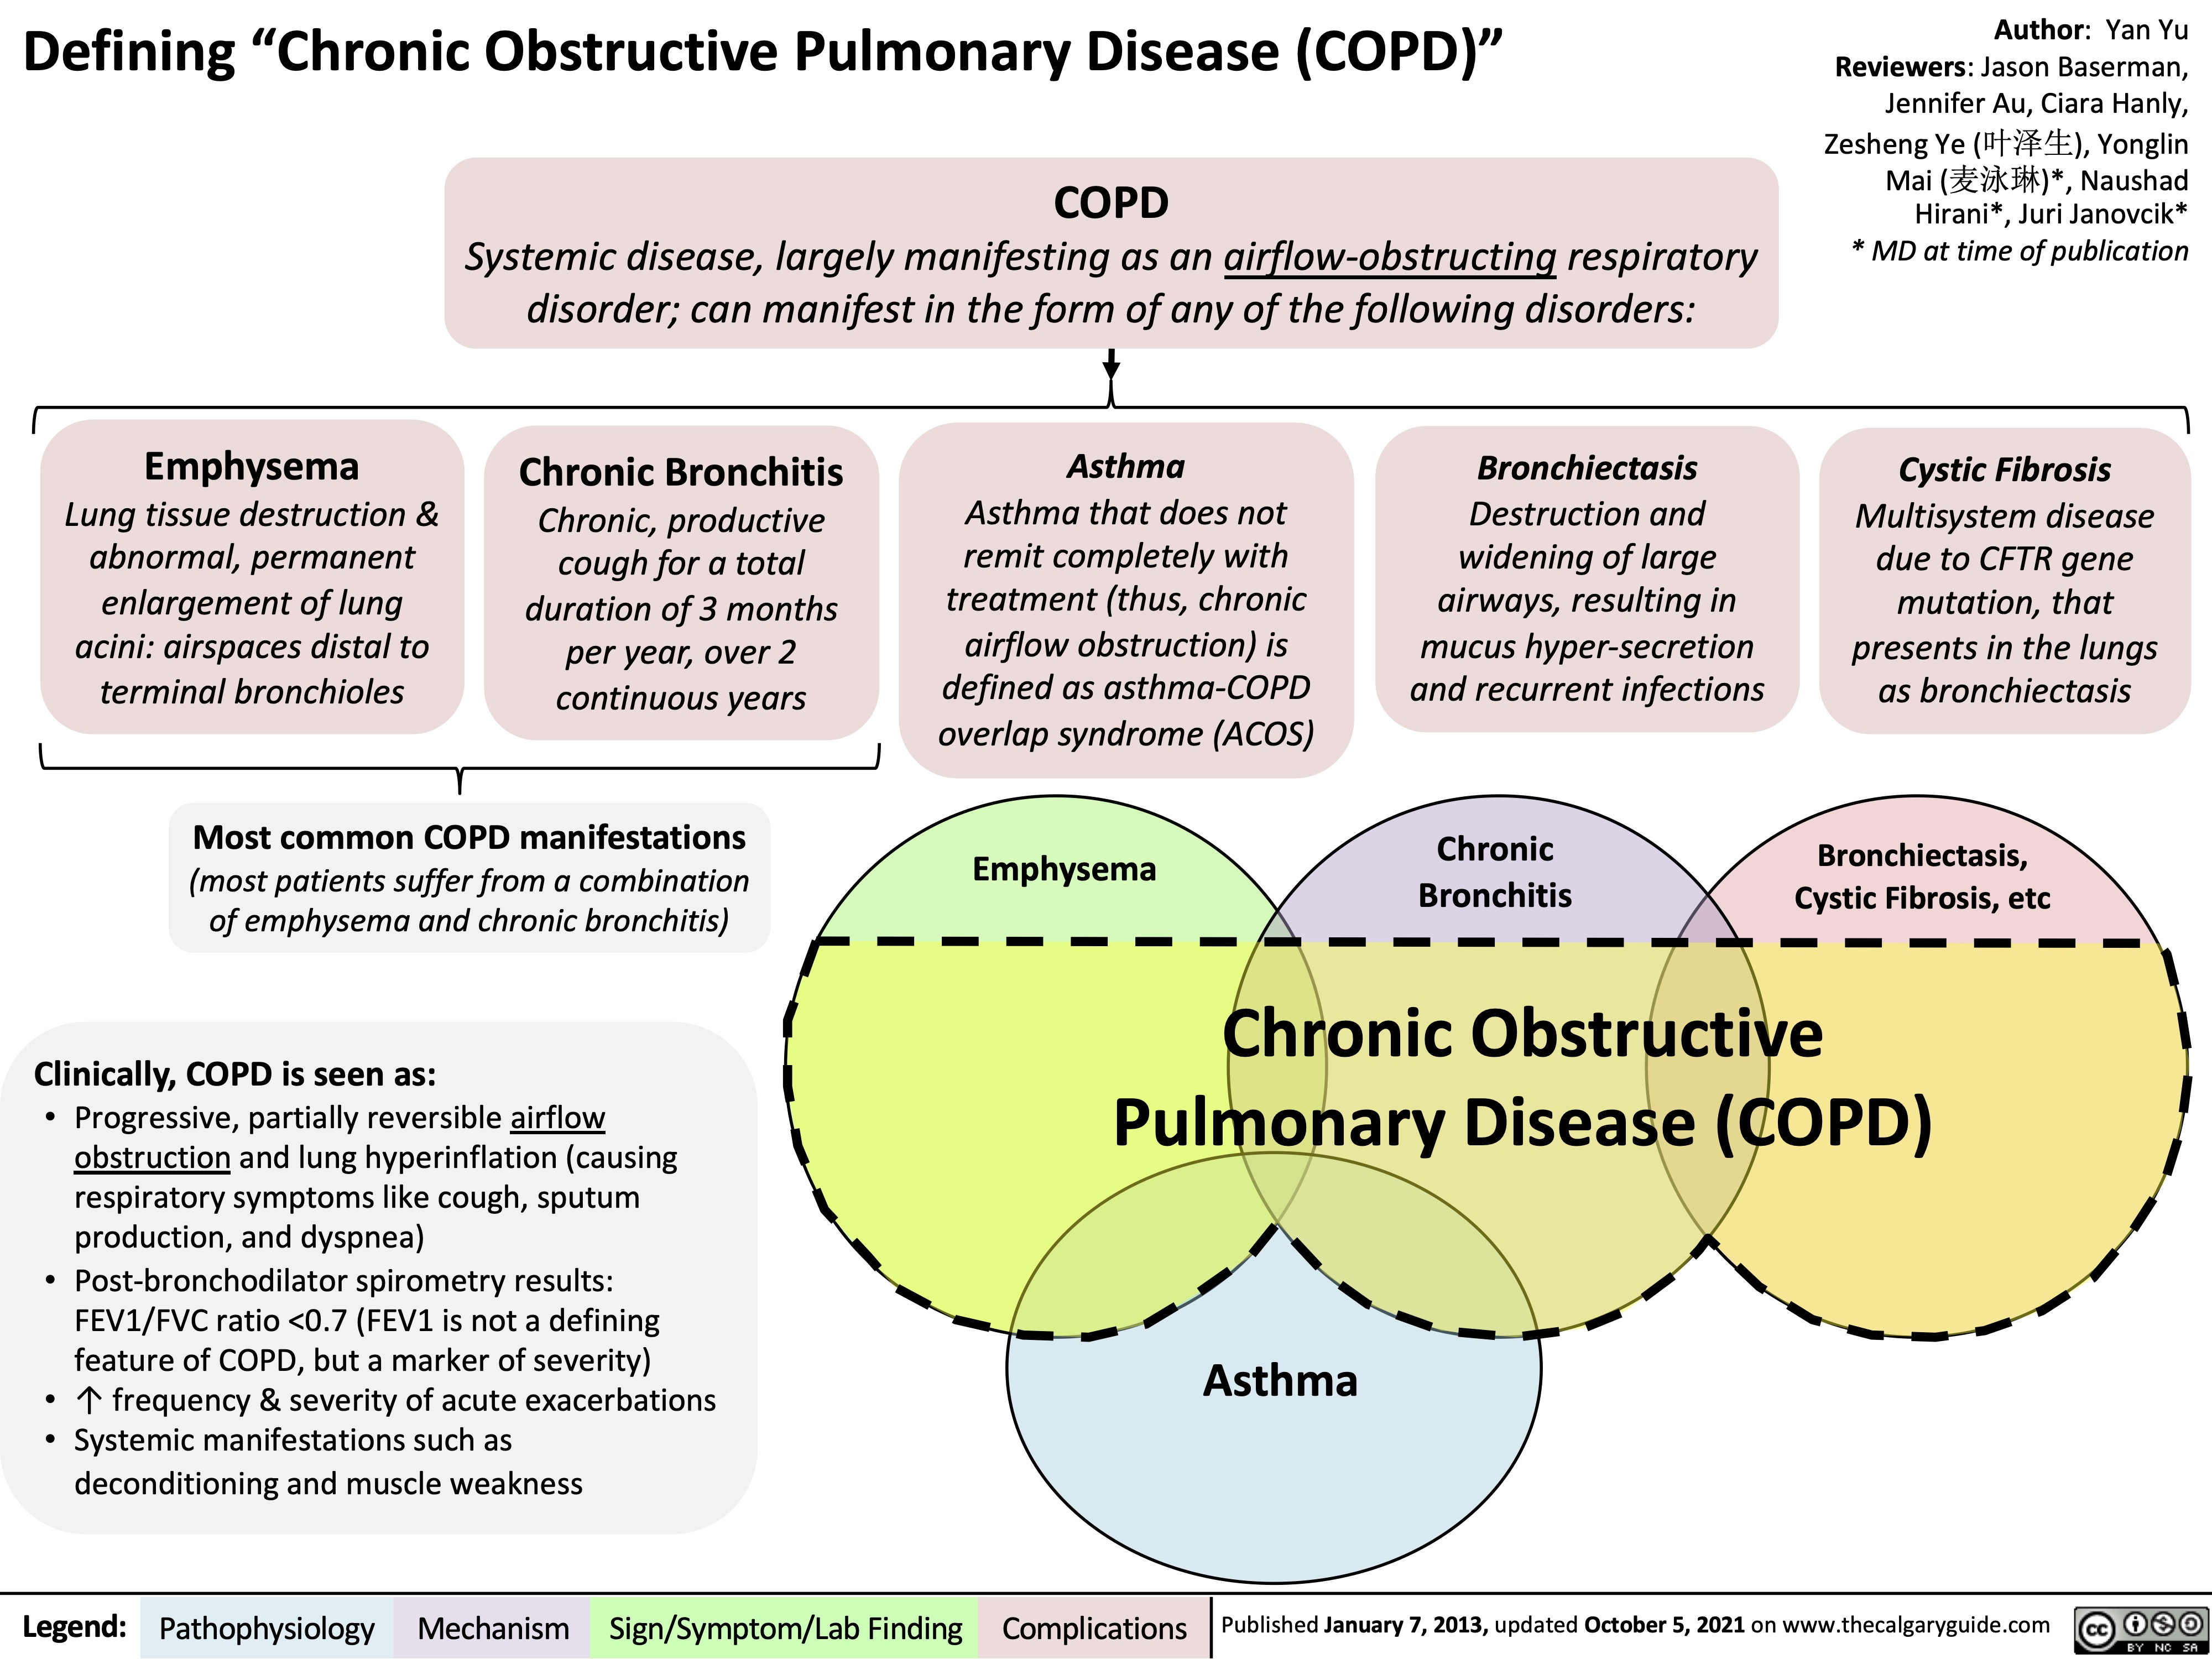 Defining “Chronic Obstructive Pulmonary Disease (COPD)”
Author: Yan Yu Reviewers: Jason Baserman, Jennifer Au, Ciara Hanly, Zesheng Ye (叶泽生), Yonglin Mai (麦泳琳)*, Naushad Hirani*, Juri Janovcik* * MD at time of publication
Cystic Fibrosis
Multisystem disease due to CFTR gene mutation, that presents in the lungs as bronchiectasis
Bronchiectasis, Cystic Fibrosis, etc
 COPD
Systemic disease, largely manifesting as an airflow-obstructing respiratory disorder; can manifest in the form of any of the following disorders:
       Emphysema
Lung tissue destruction & abnormal, permanent enlargement of lung acini: airspaces distal to terminal bronchioles
Chronic Bronchitis
Chronic, productive cough for a total duration of 3 months per year, over 2 continuous years
Asthma
Asthma that does not
remit completely with treatment (thus, chronic airflow obstruction) is defined as asthma-COPD overlap syndrome (ACOS)
Emphysema
Bronchiectasis
Destruction and widening of large airways, resulting in mucus hyper-secretion and recurrent infections
Chronic Bronchitis
     Most common COPD manifestations
(most patients suffer from a combination of emphysema and chronic bronchitis)
Clinically, COPD is seen as:
• Progressive, partially reversible airflow obstruction and lung hyperinflation (causing respiratory symptoms like cough, sputum production, and dyspnea)
• Post-bronchodilator spirometry results: FEV1/FVC ratio <0.7 (FEV1 is not a defining feature of COPD, but a marker of severity)
• ↑ frequency & severity of acute exacerbations
• Systemic manifestations such as
deconditioning and muscle weakness
Chronic Obstructive Pulmonary Disease (COPD)
Asthma
     Legend:
 Pathophysiology
 Mechanism
Sign/Symptom/Lab Finding
 Complications
 Published January 7, 2013, updated October 5, 2021 on www.thecalgaryguide.com
  